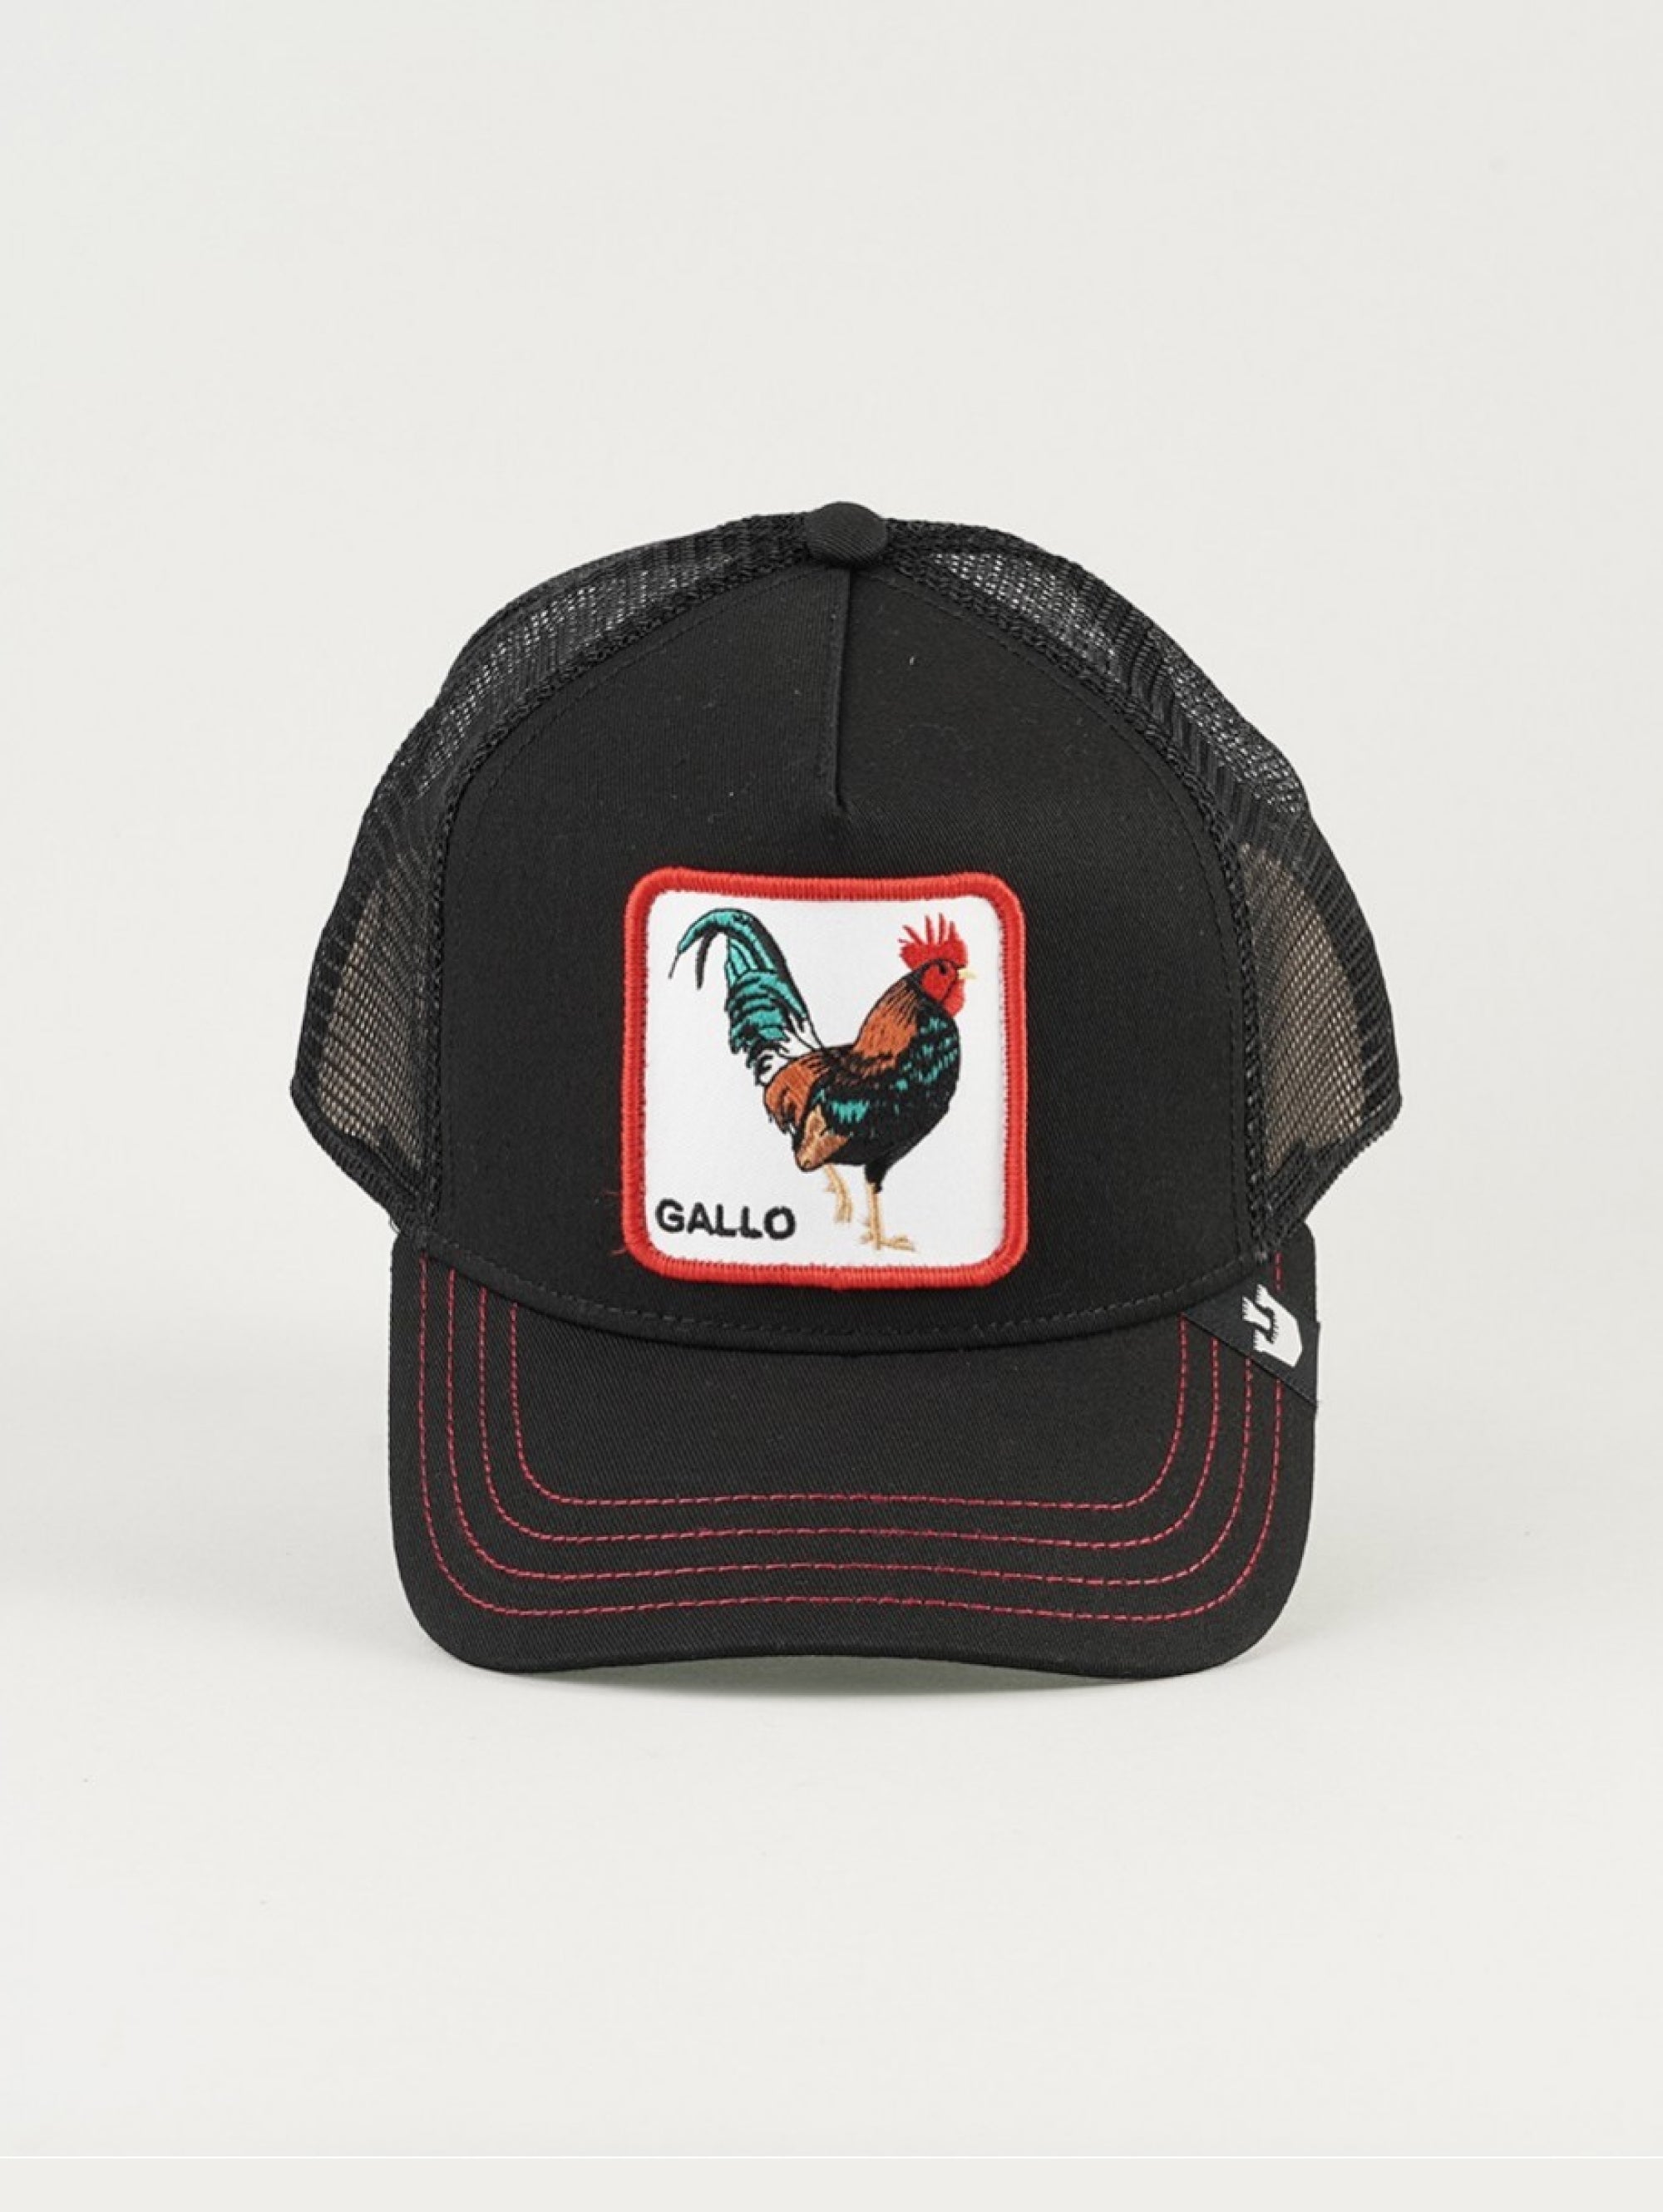 Trucker hat with El Gallo patch